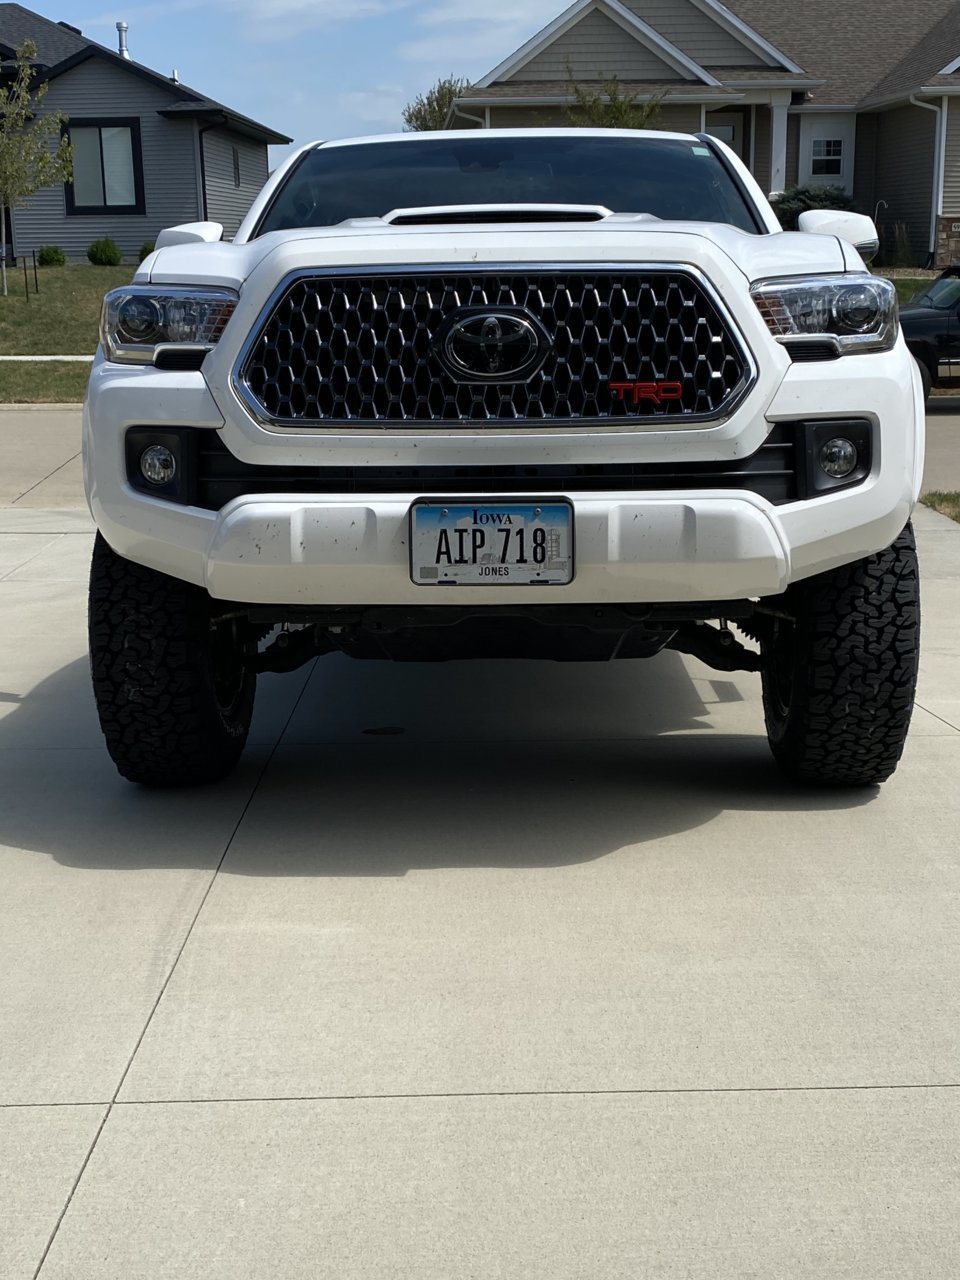 Color matching TRD grille badges | Page 11 | Tacoma World